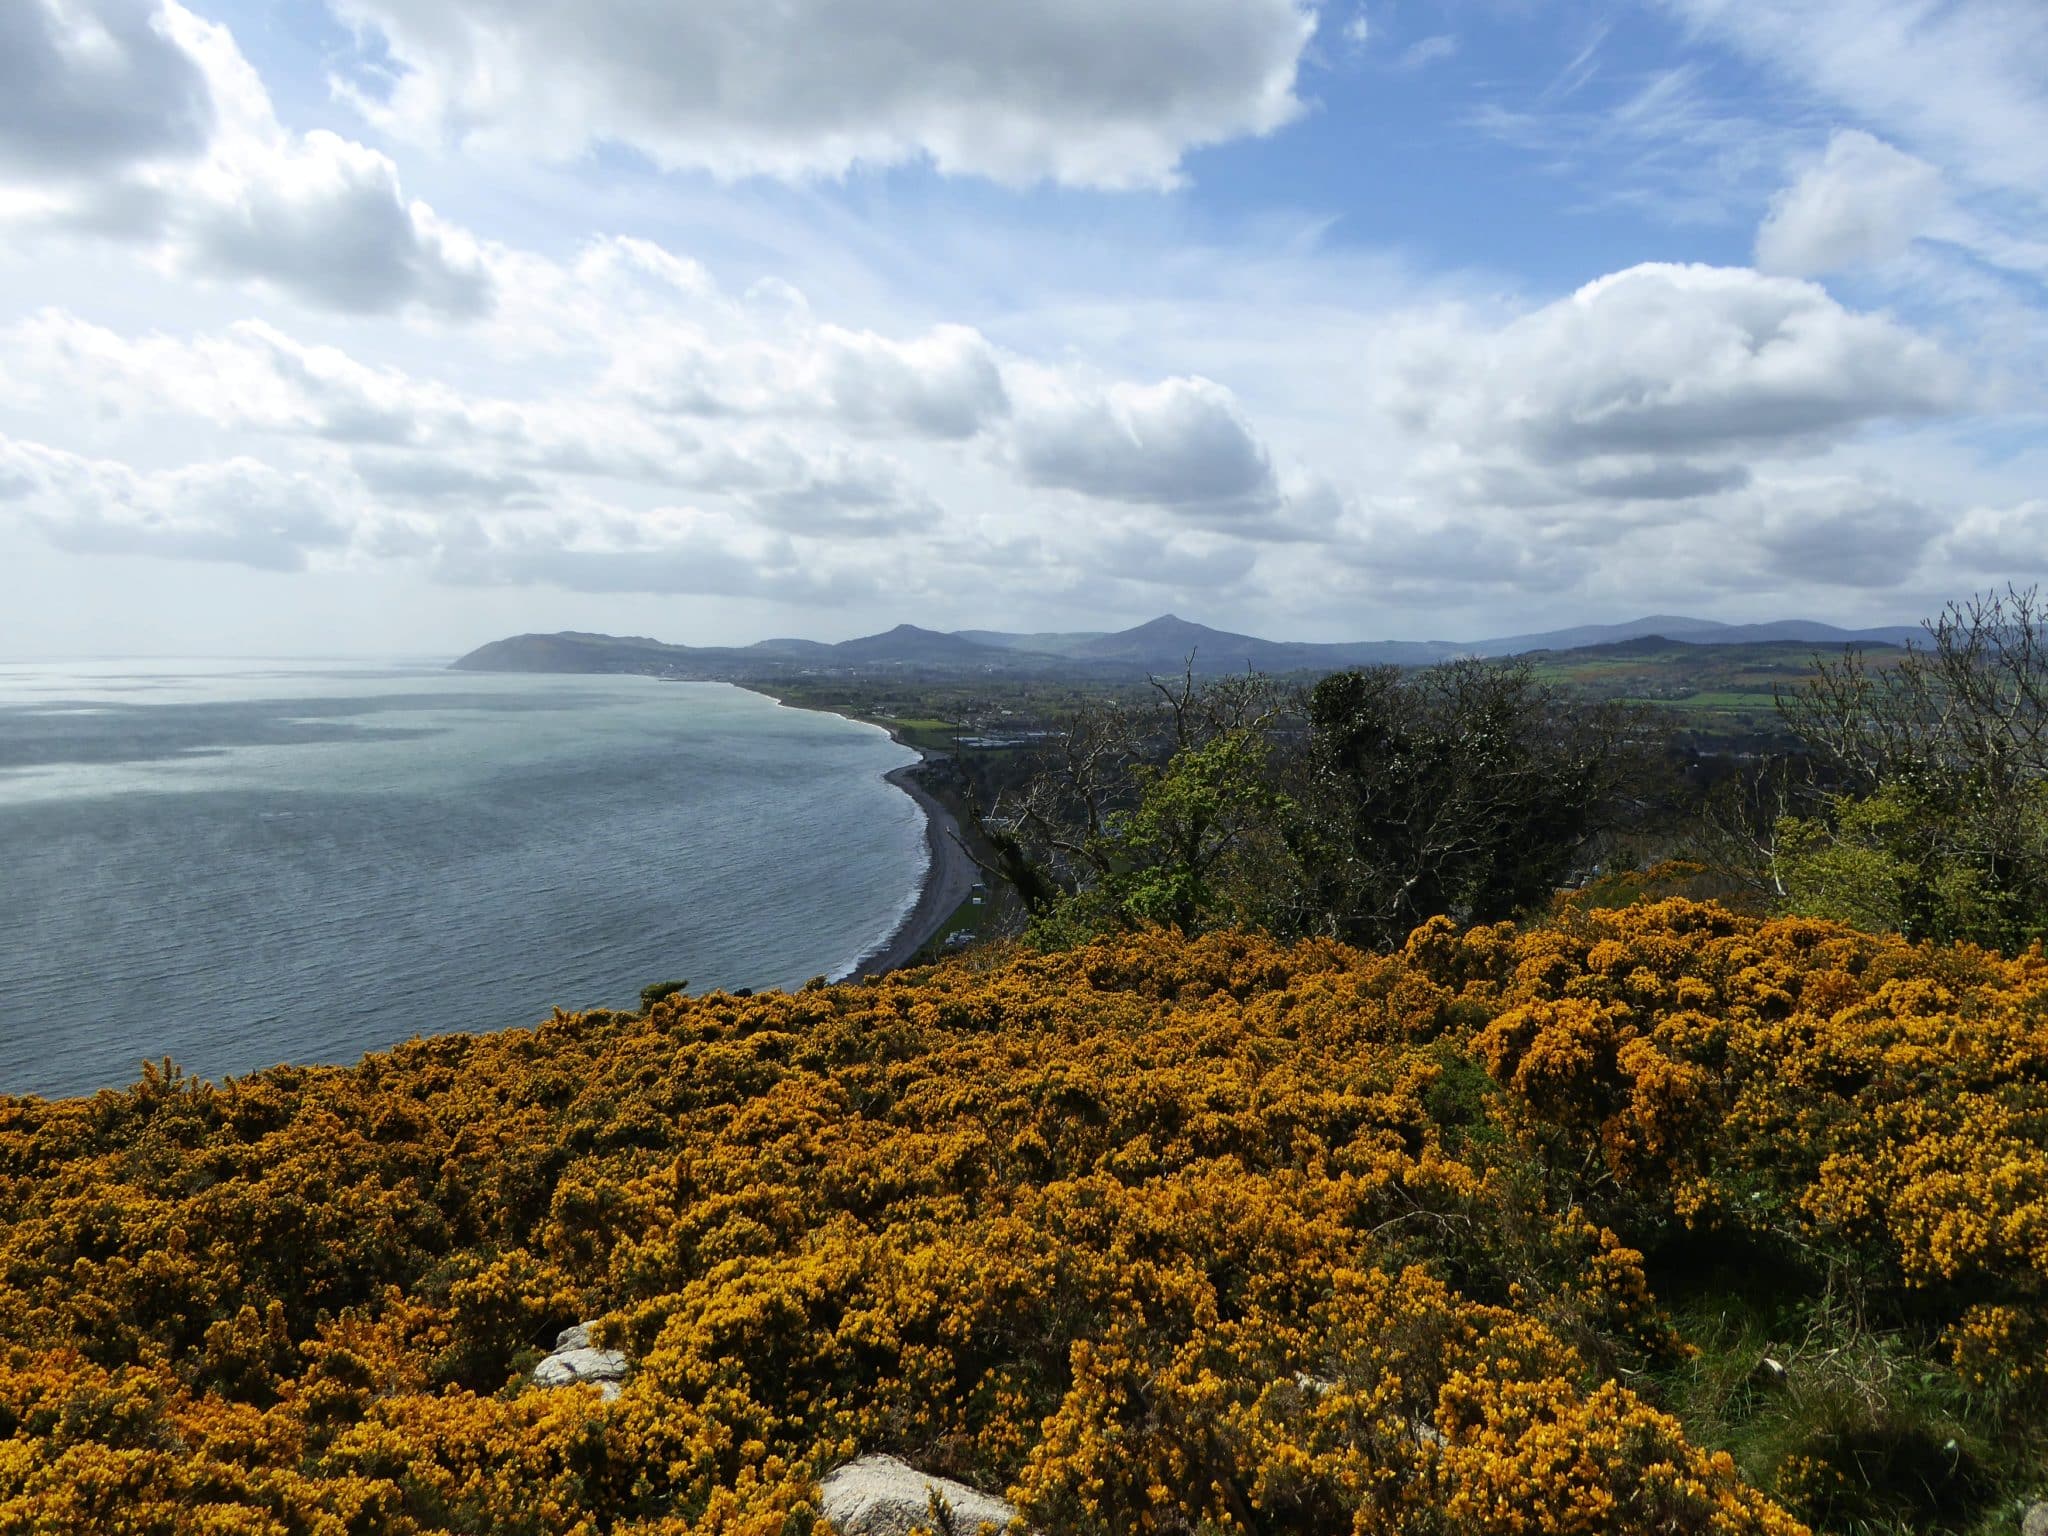 View of the sea from Killiney Hill, one of the most beautiful viewpoints in Dublin.